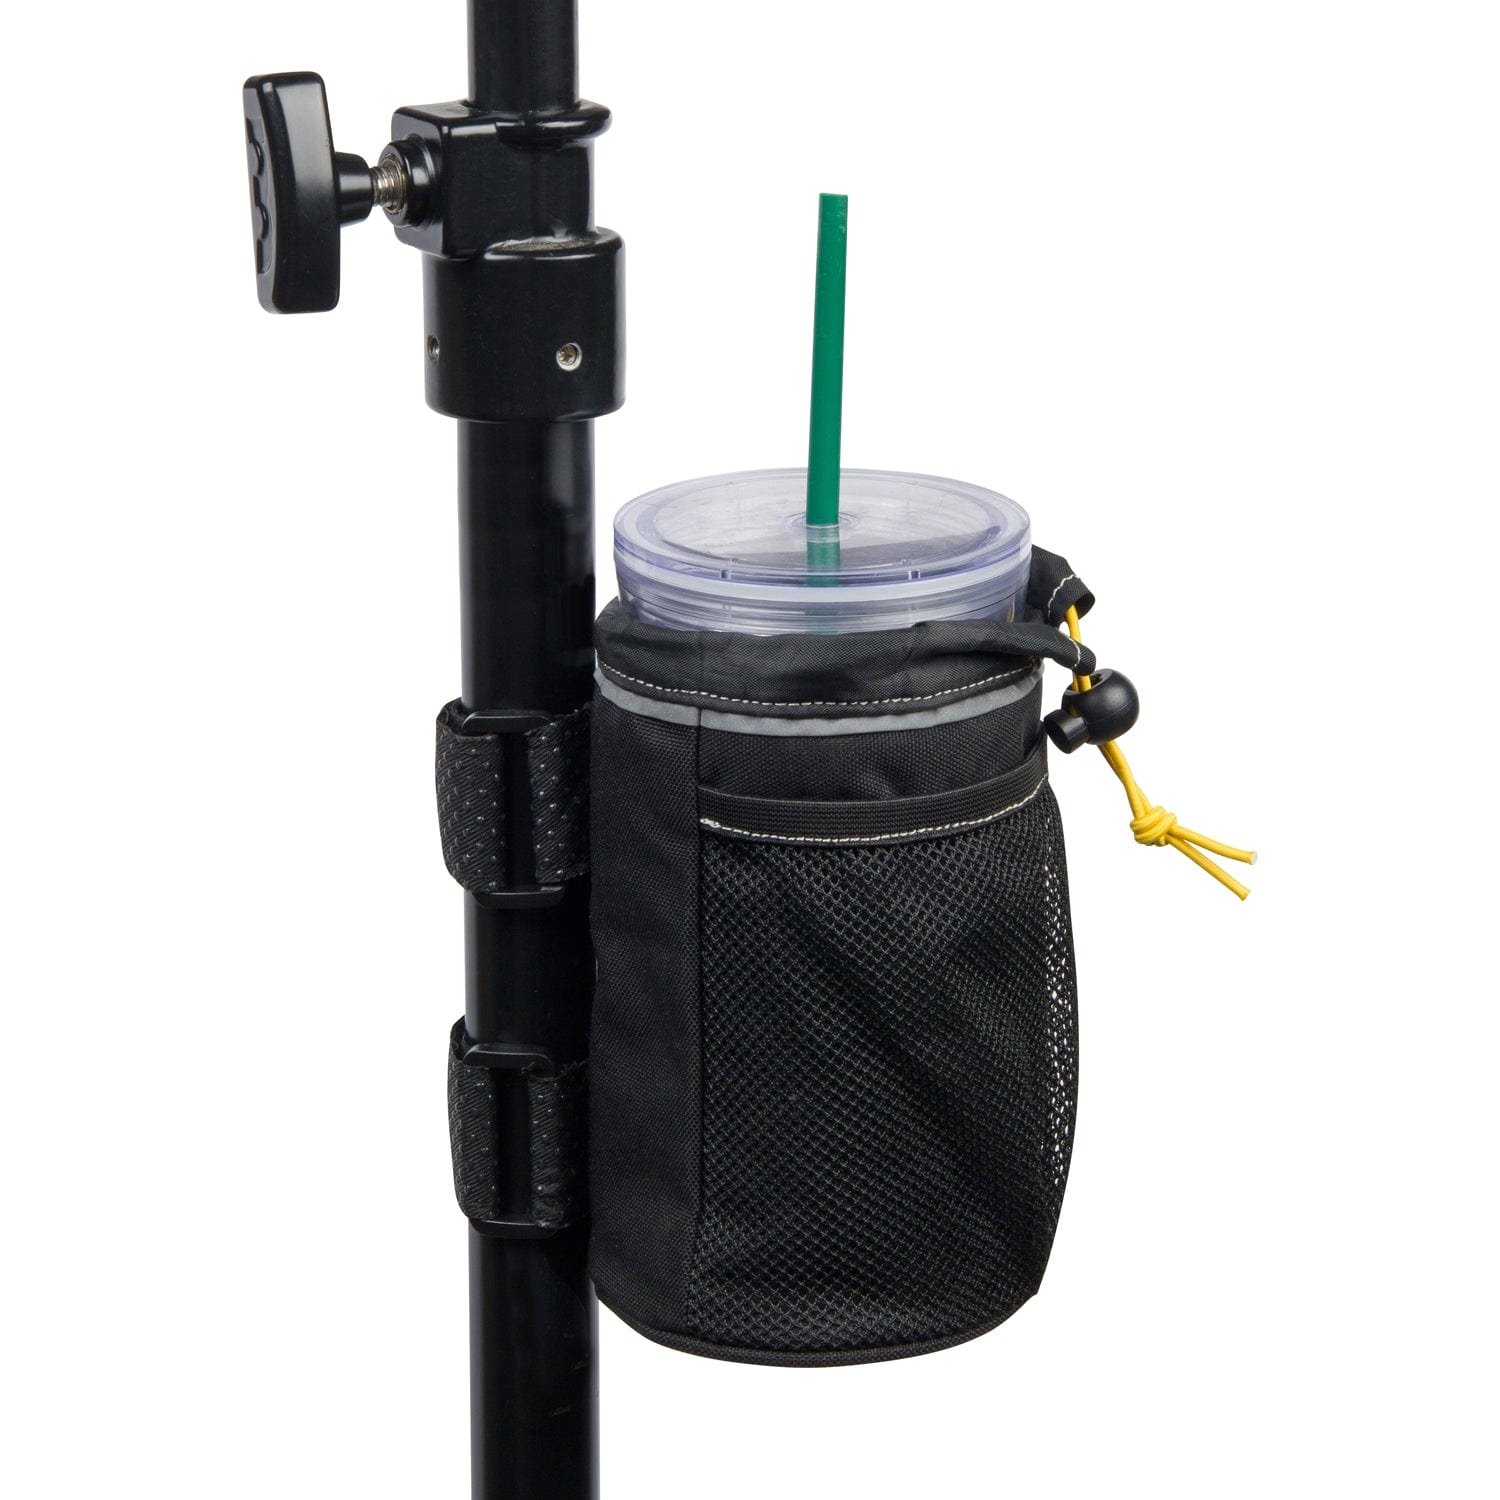 RoboCup BLACK, Patented Portable Caddy Cup Holder Tote, Organizer